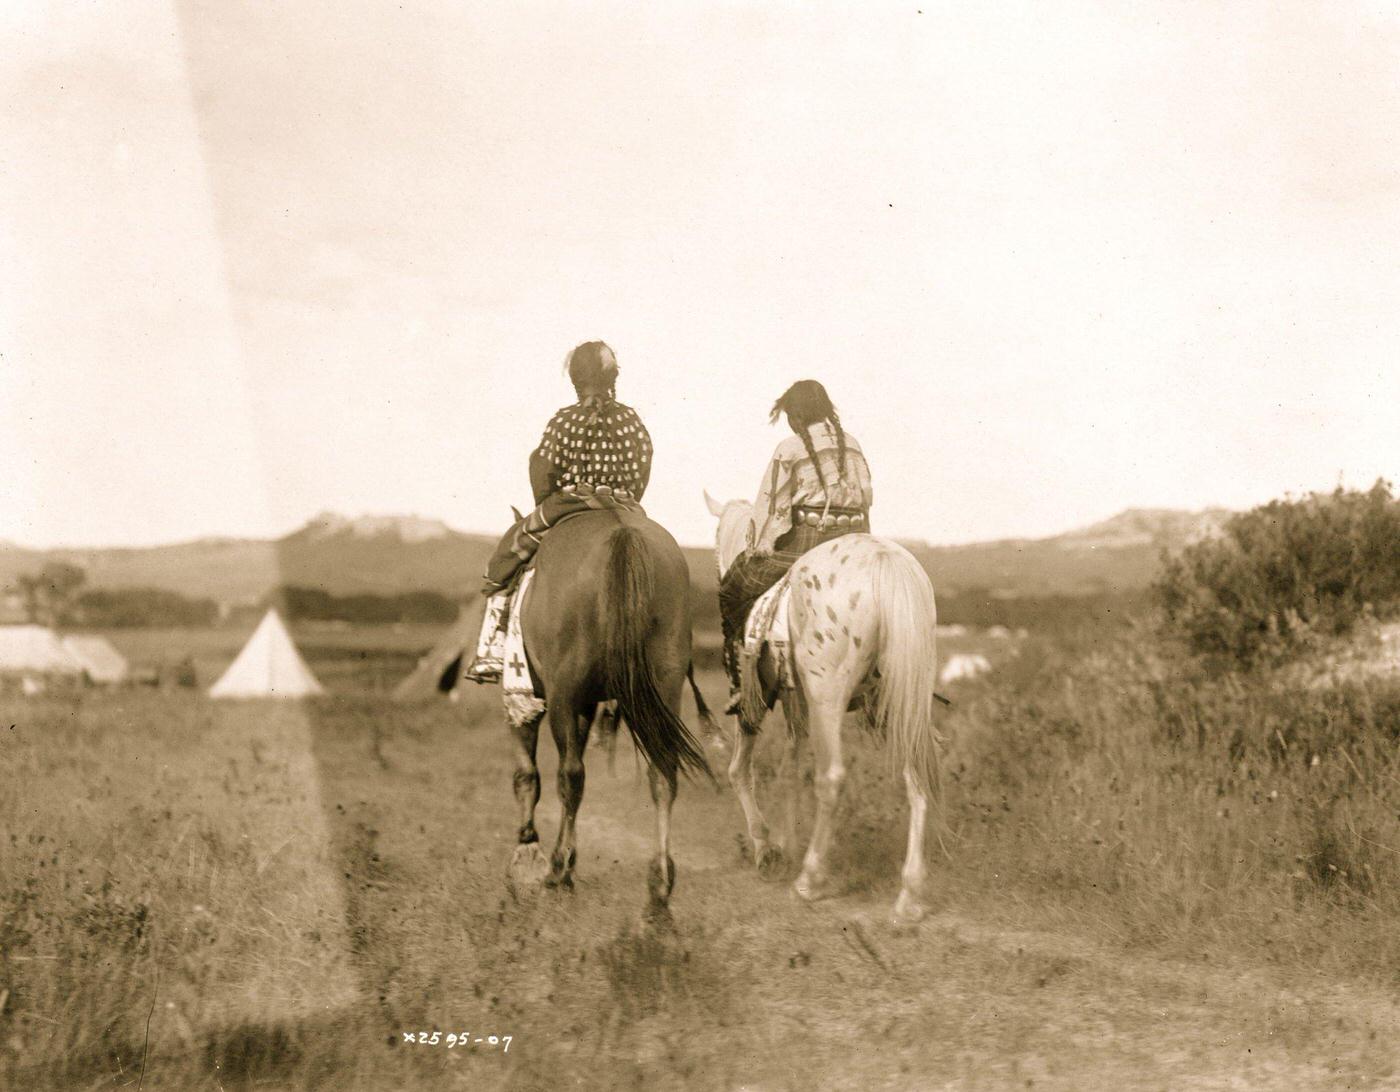 Two daughters of a chief on horseback, riding away from camera toward tents in background, 1907